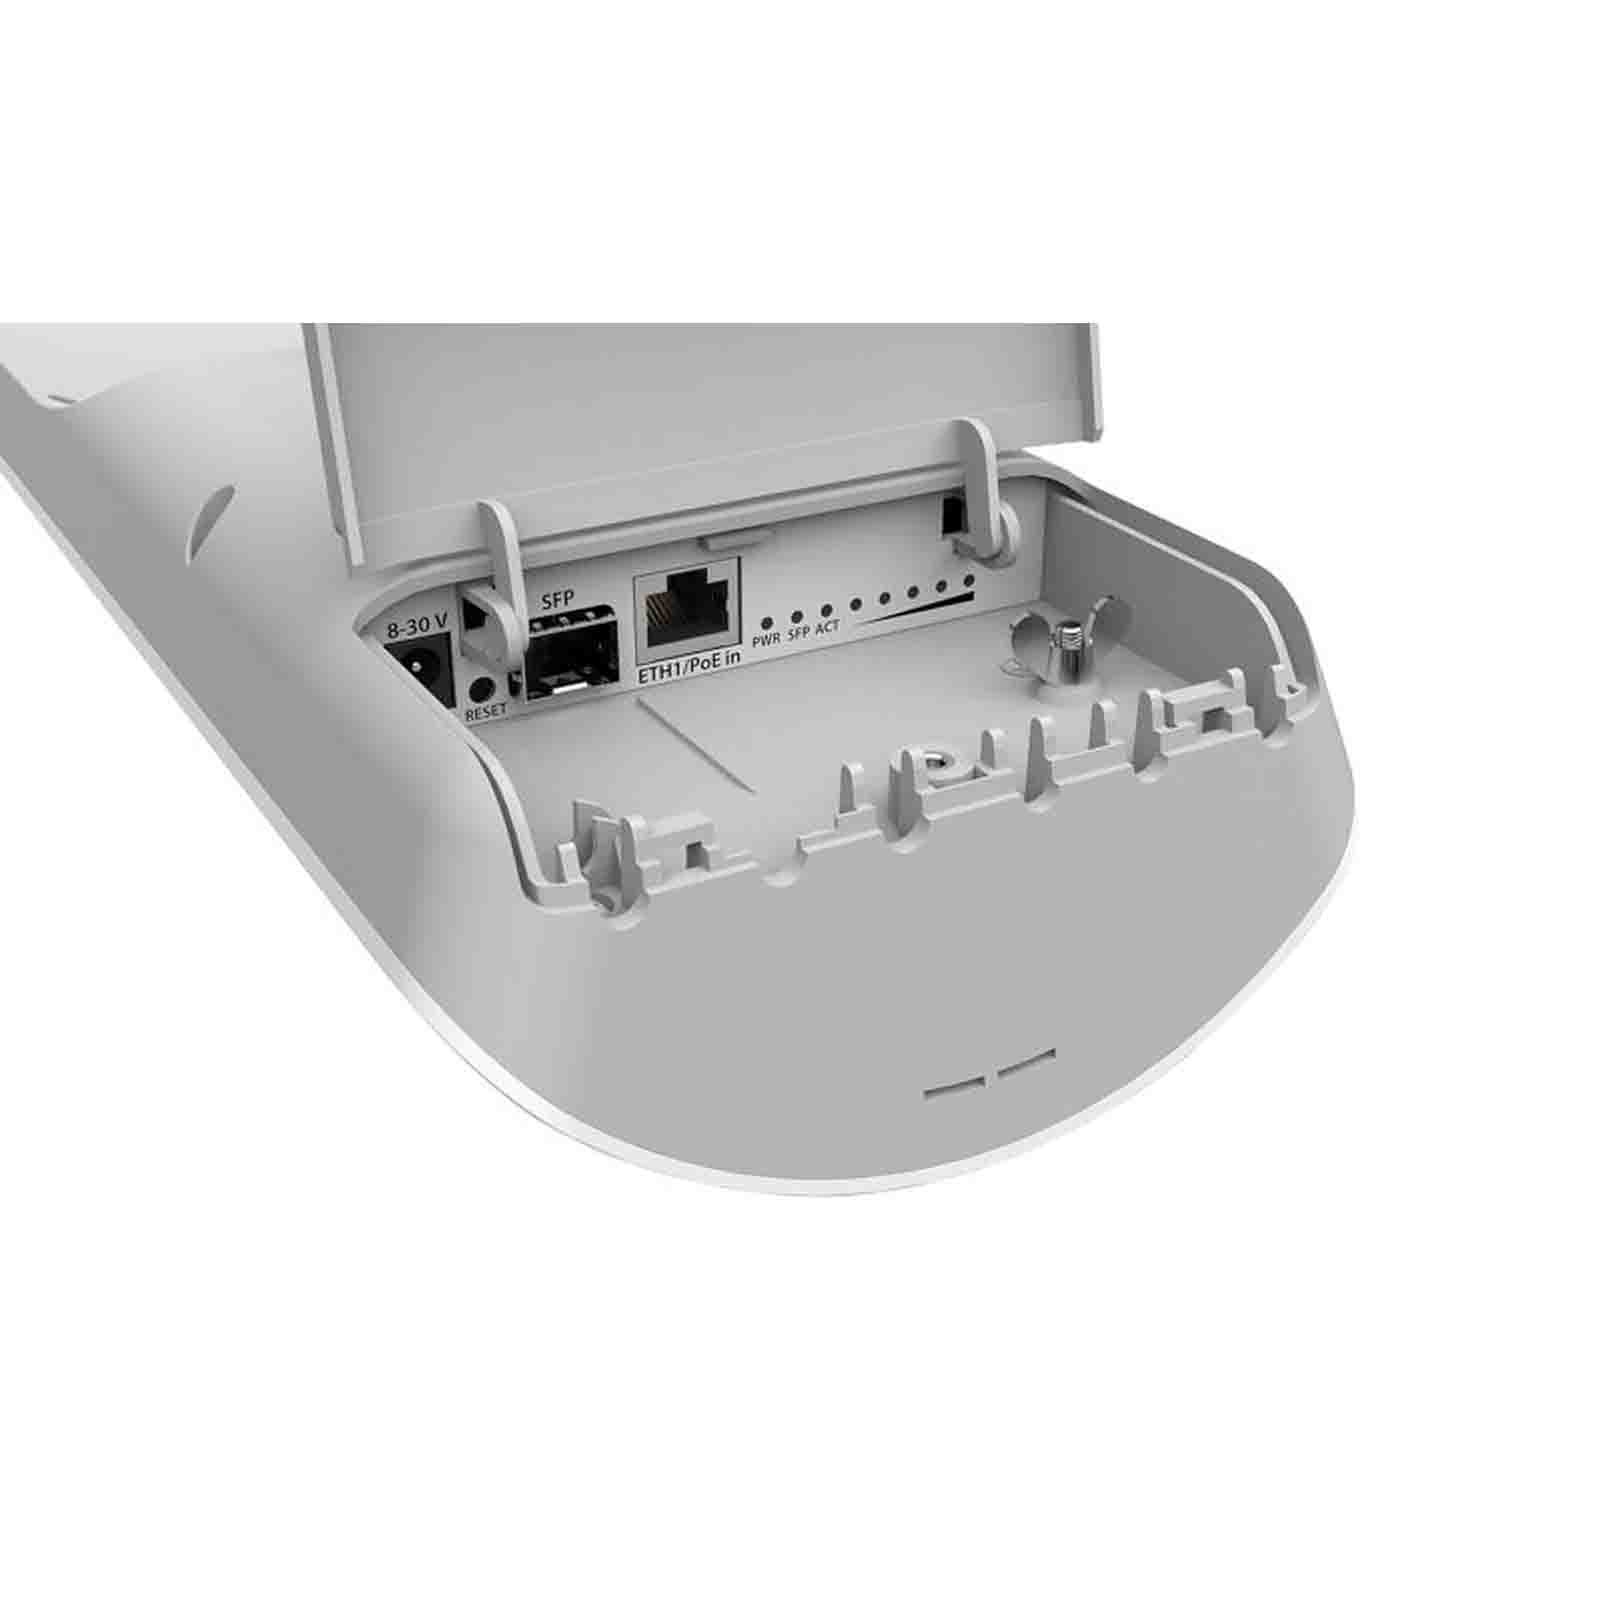 MikroTik mANTBox 19s (RB921GS-5HPacD-19S)